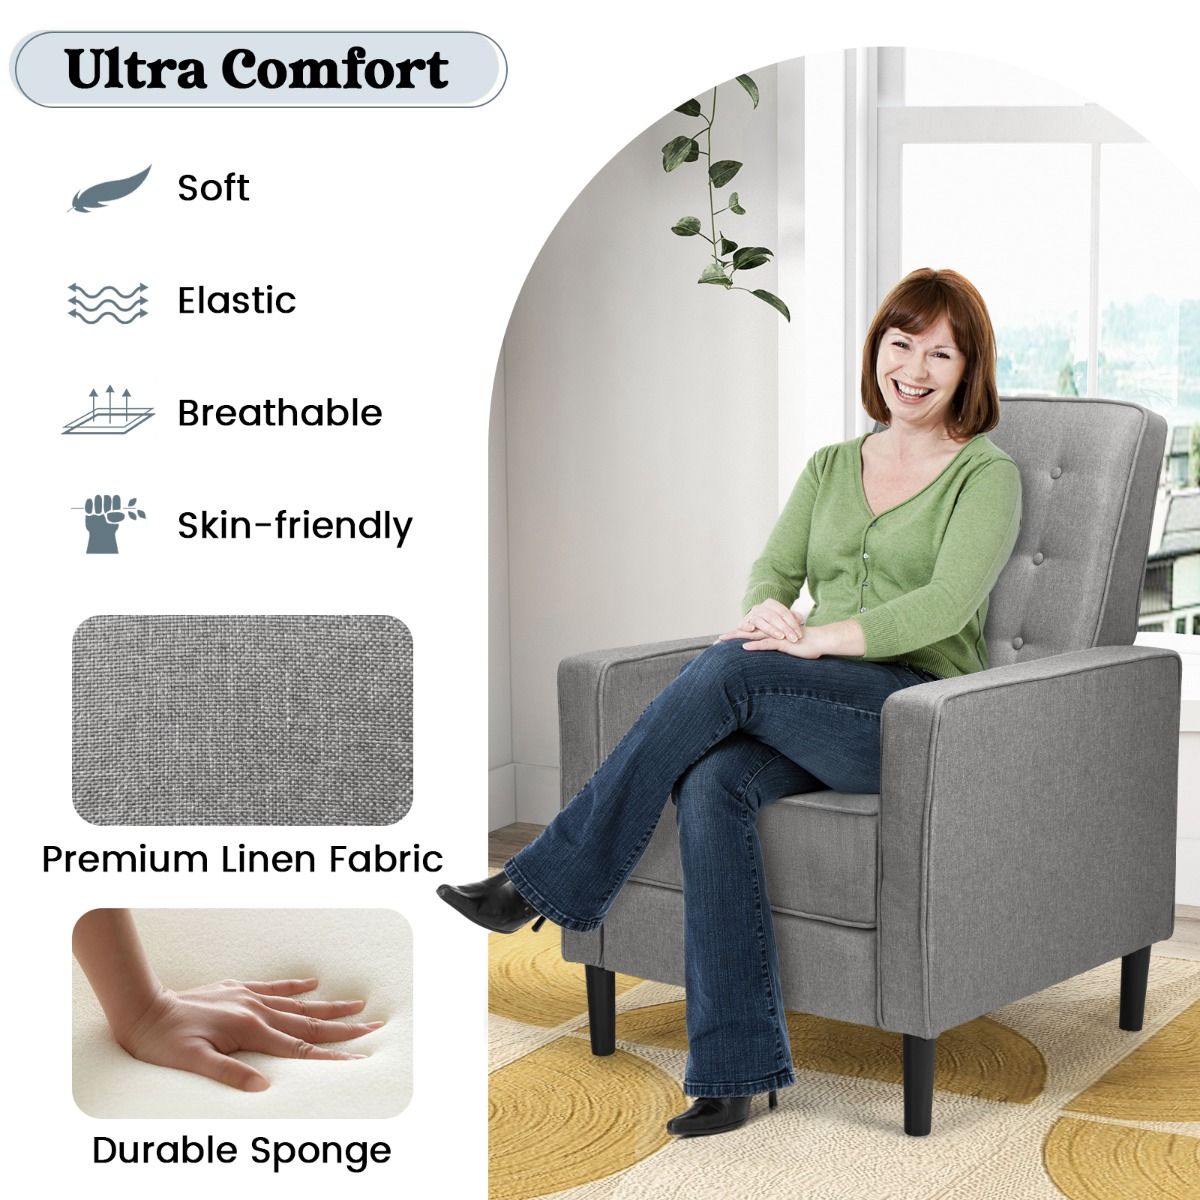 3-Position Adjustable Sofa Chair Leisure Seat with Extendable Footrest - Grey